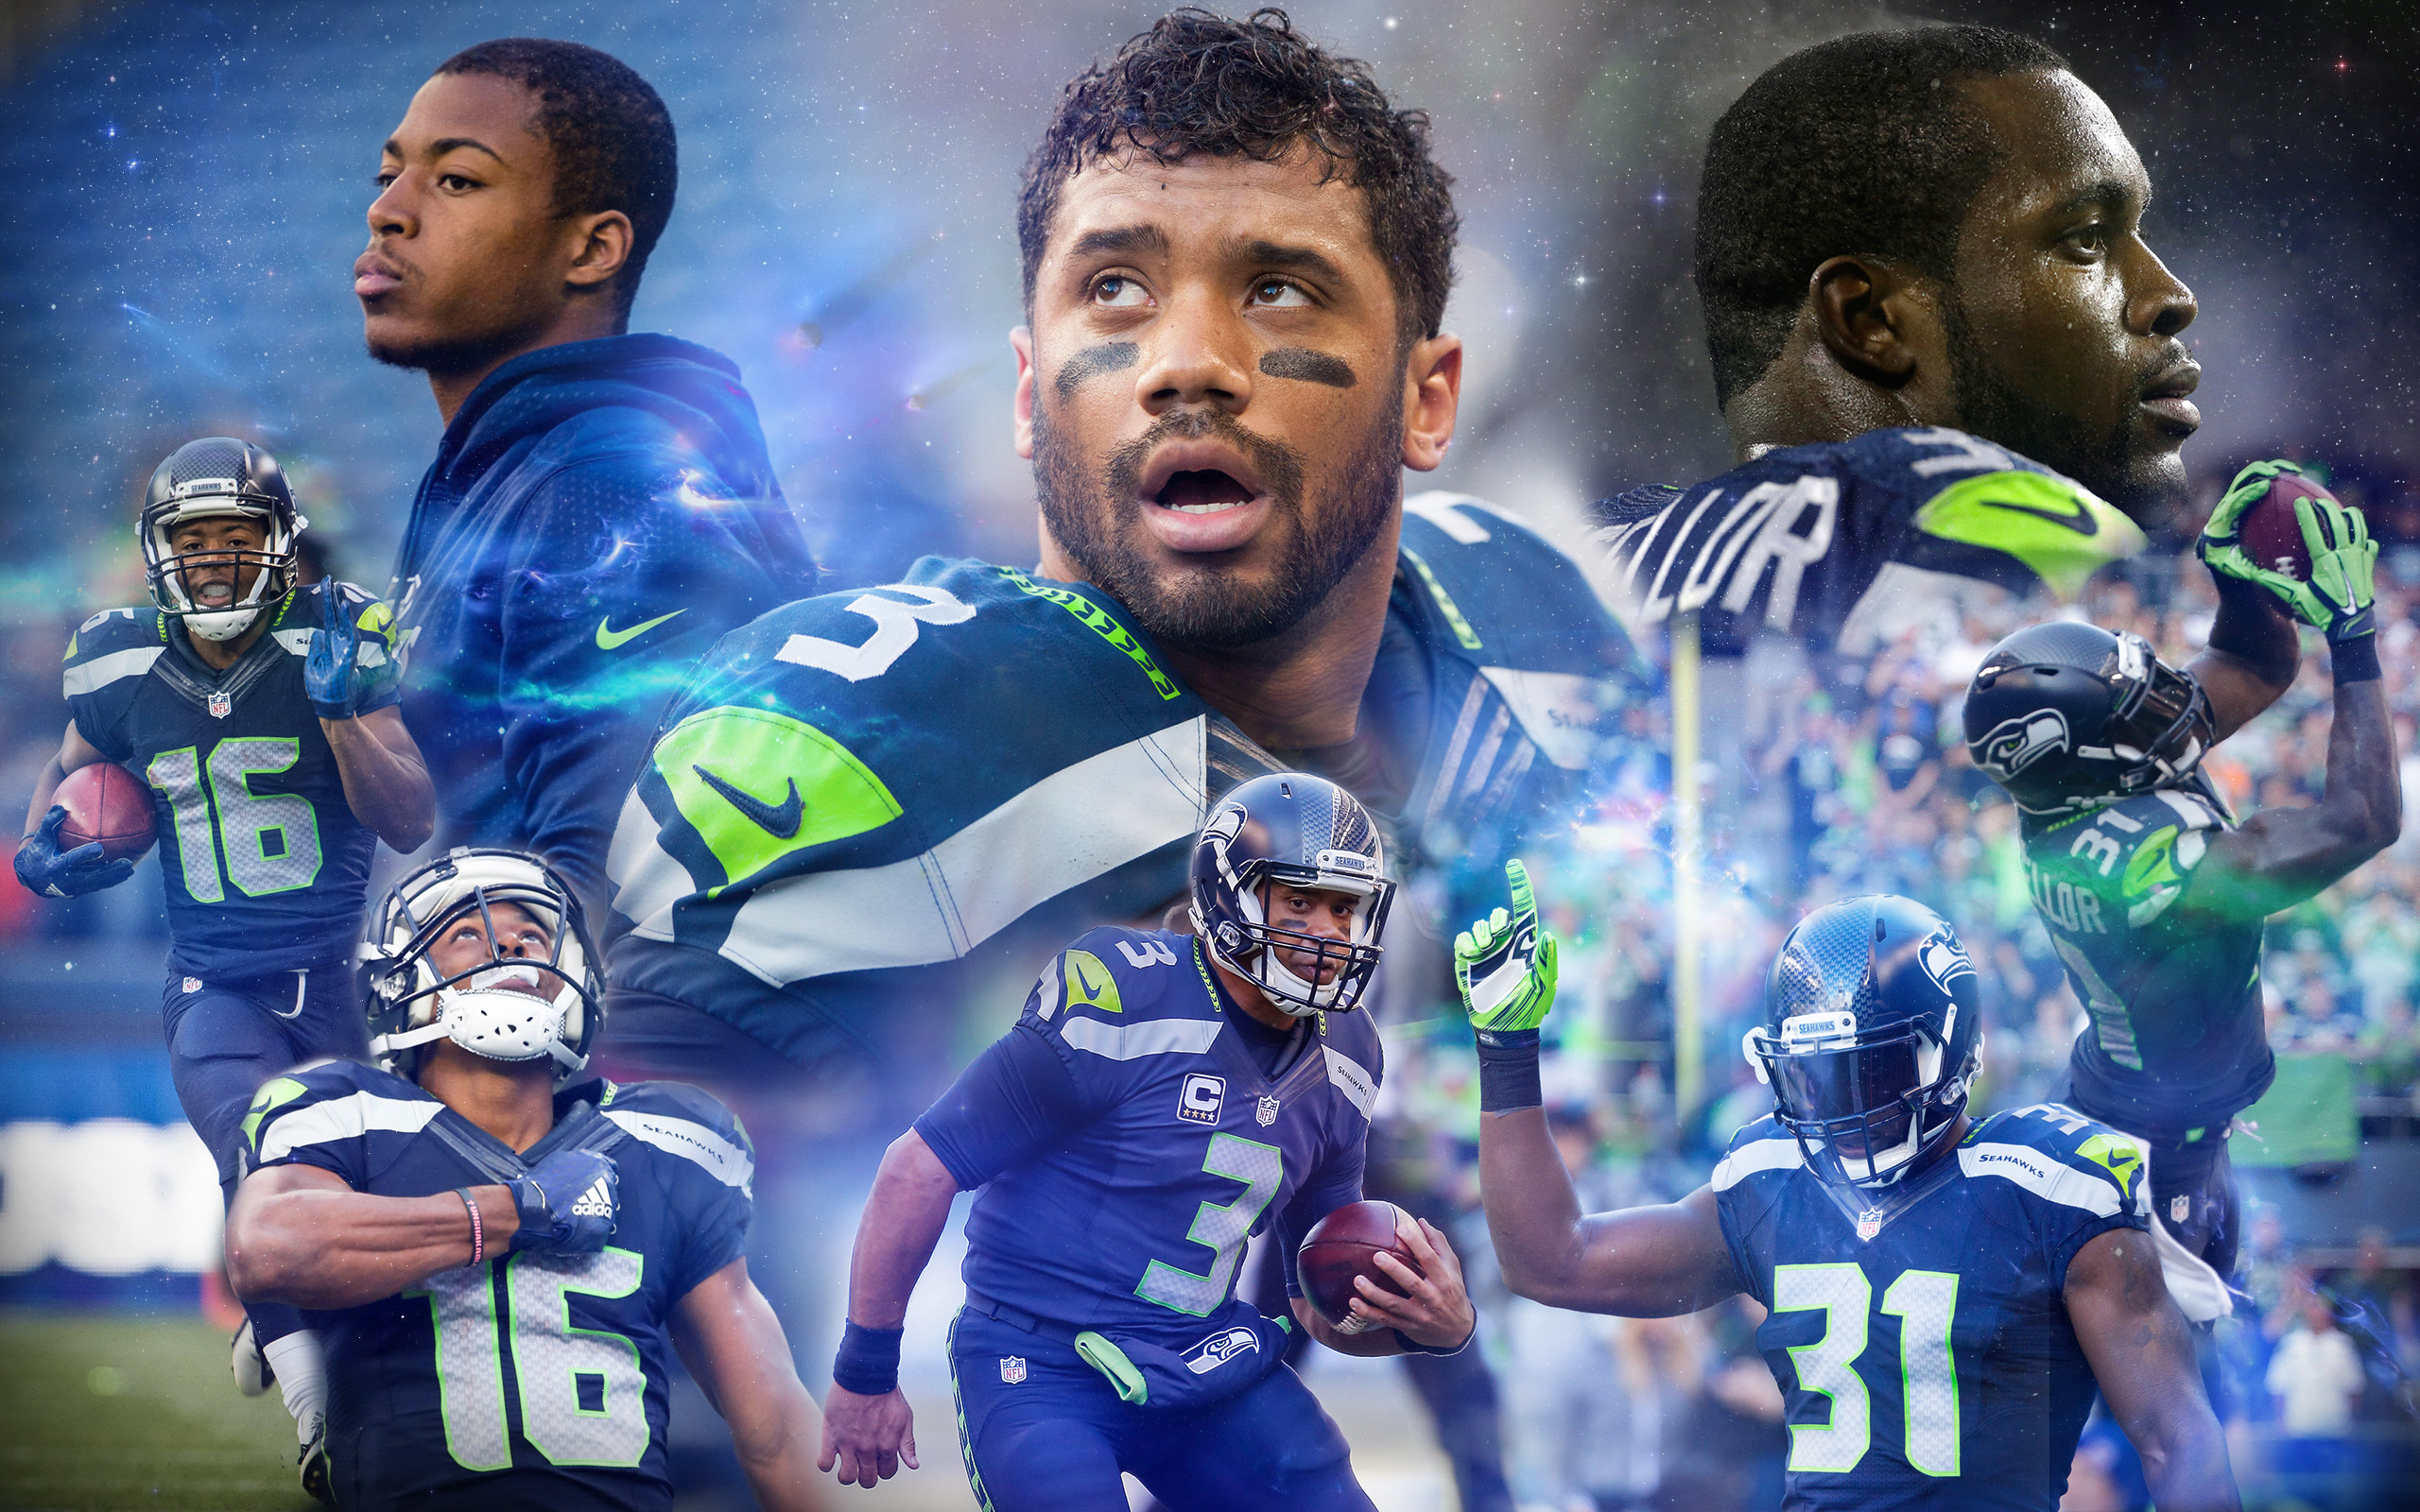 Seahawks Wallpaper Edit I Did For A Friend Photos Are Not My Own